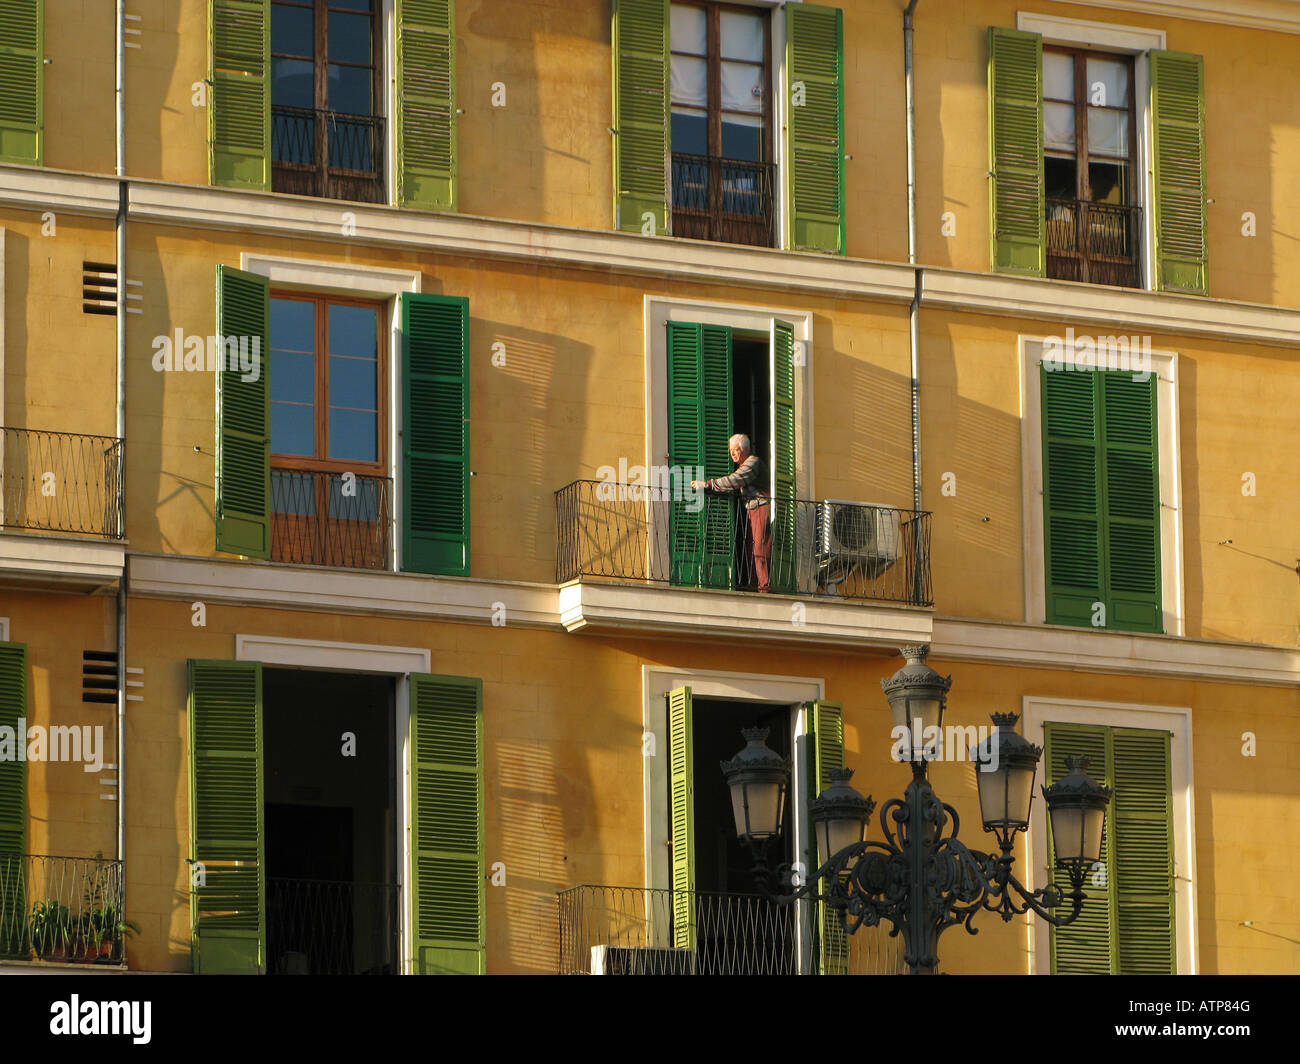 A man on one of the balconies on Plaza Major, Palma, Mallorca. An ornate street lamp is in the foreground Stock Photo